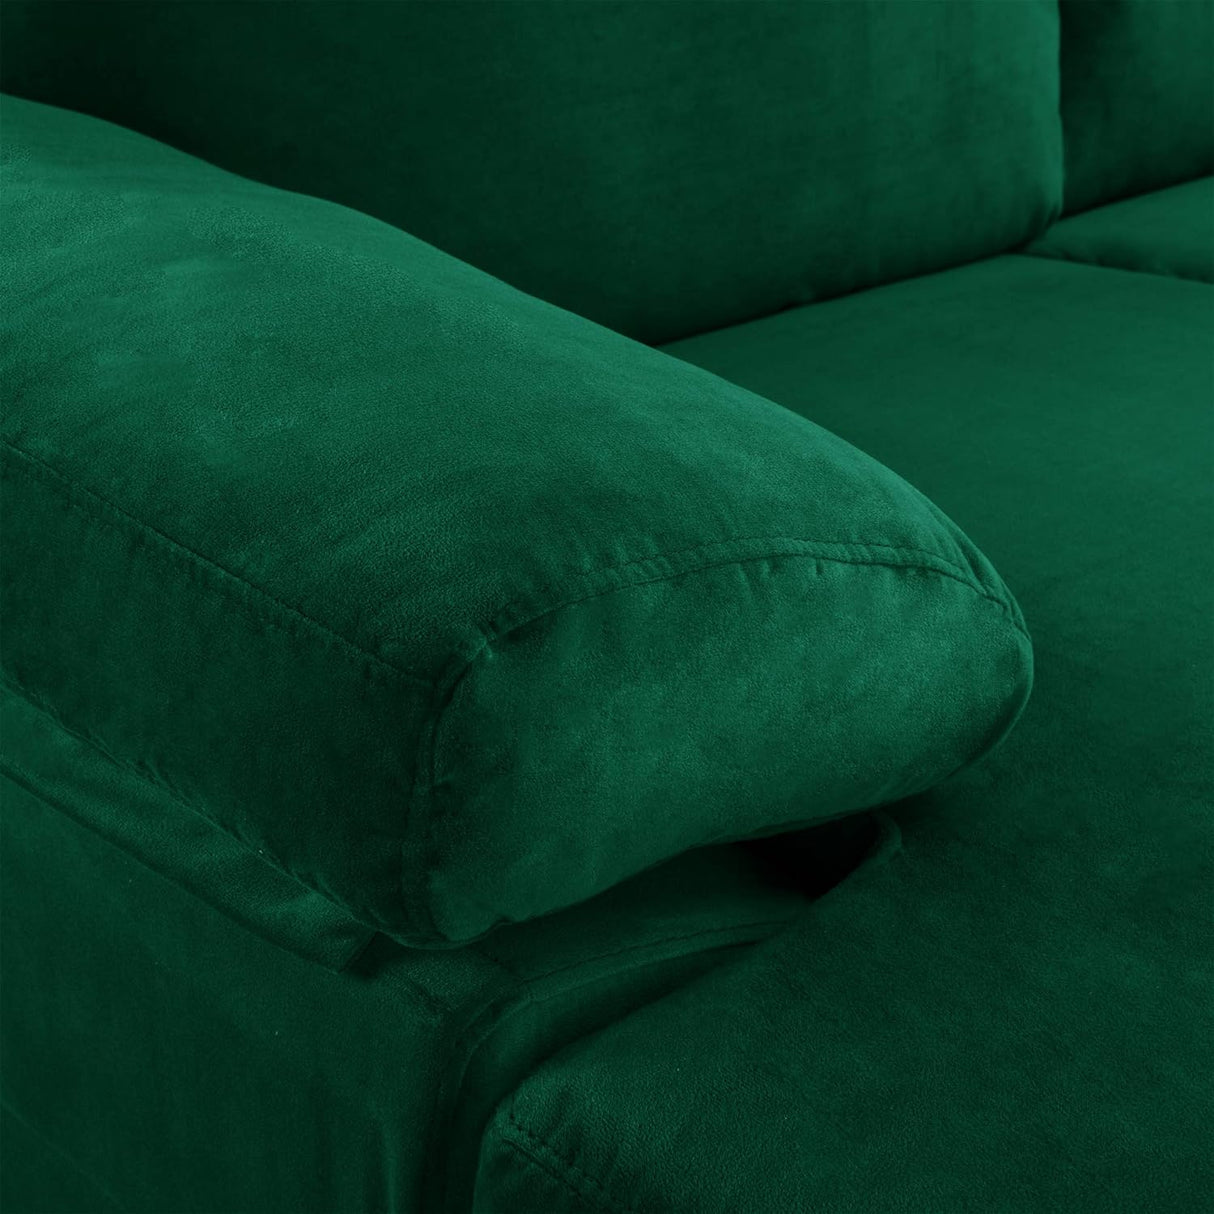 Modern Sectional Sofa L Shaped Velvet Couch, with Extra Wide Chaise Lounge, Large, Green